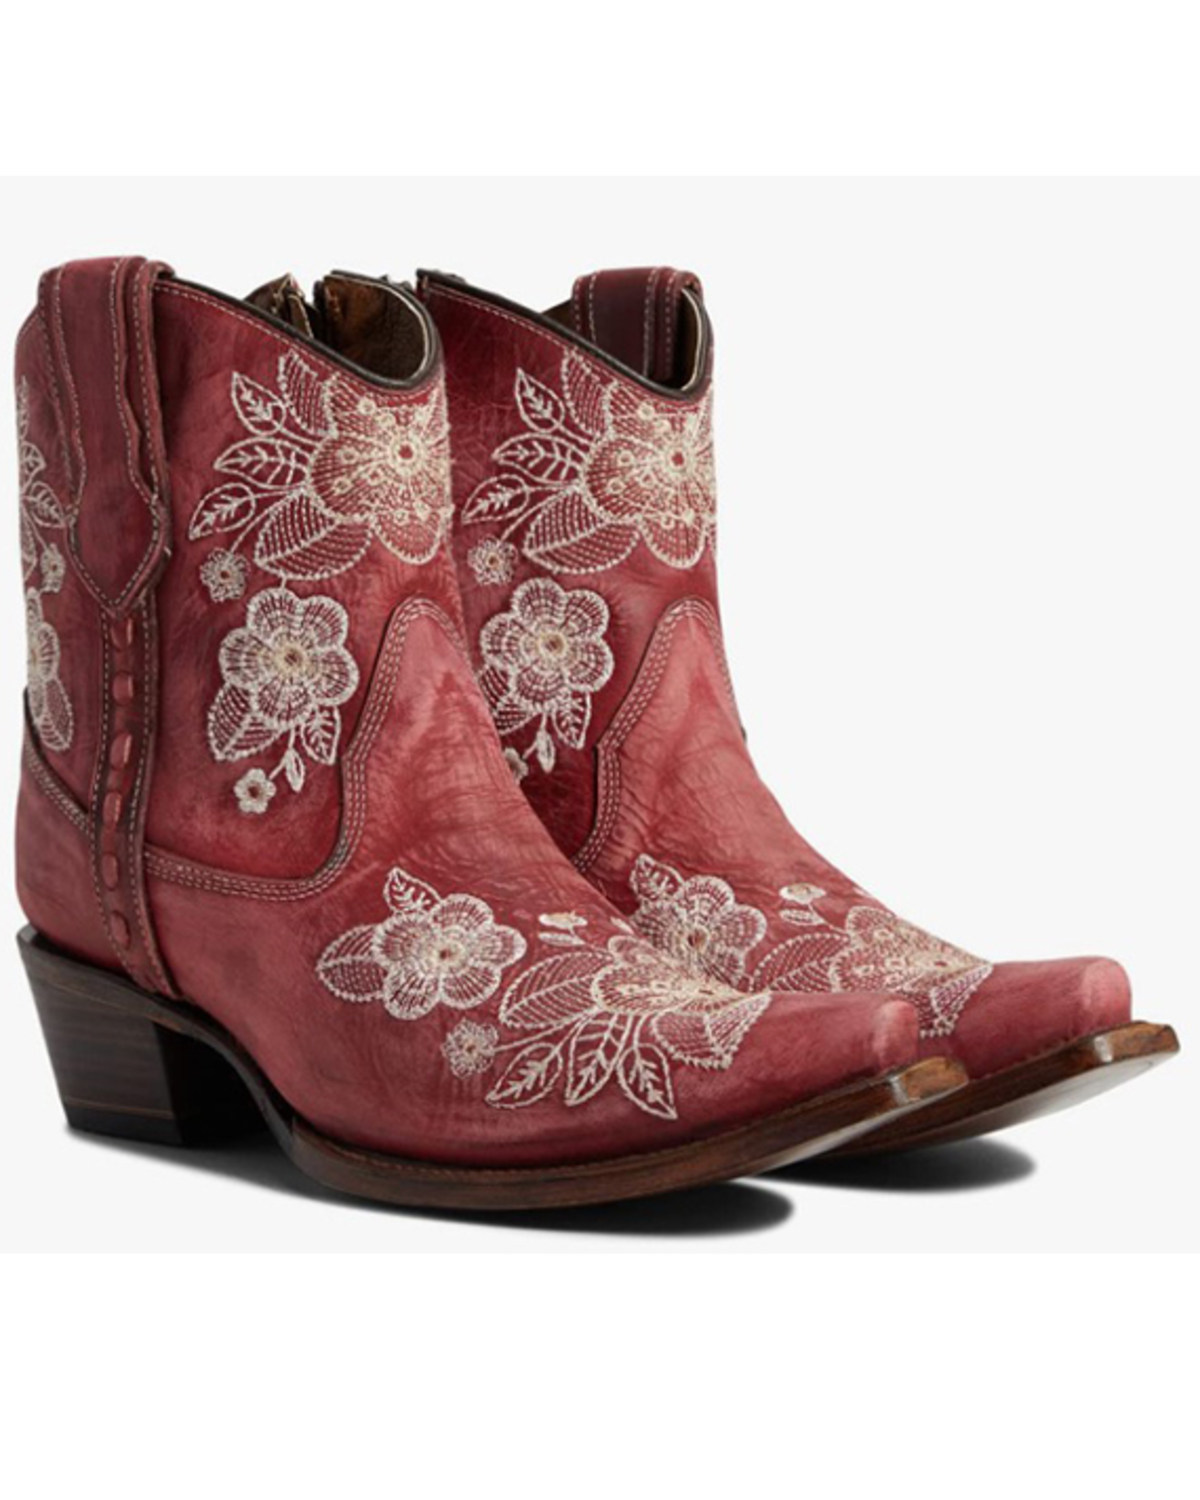 Corral Women's Flowered Embroidery Ankle Western Booties - Snip Toe